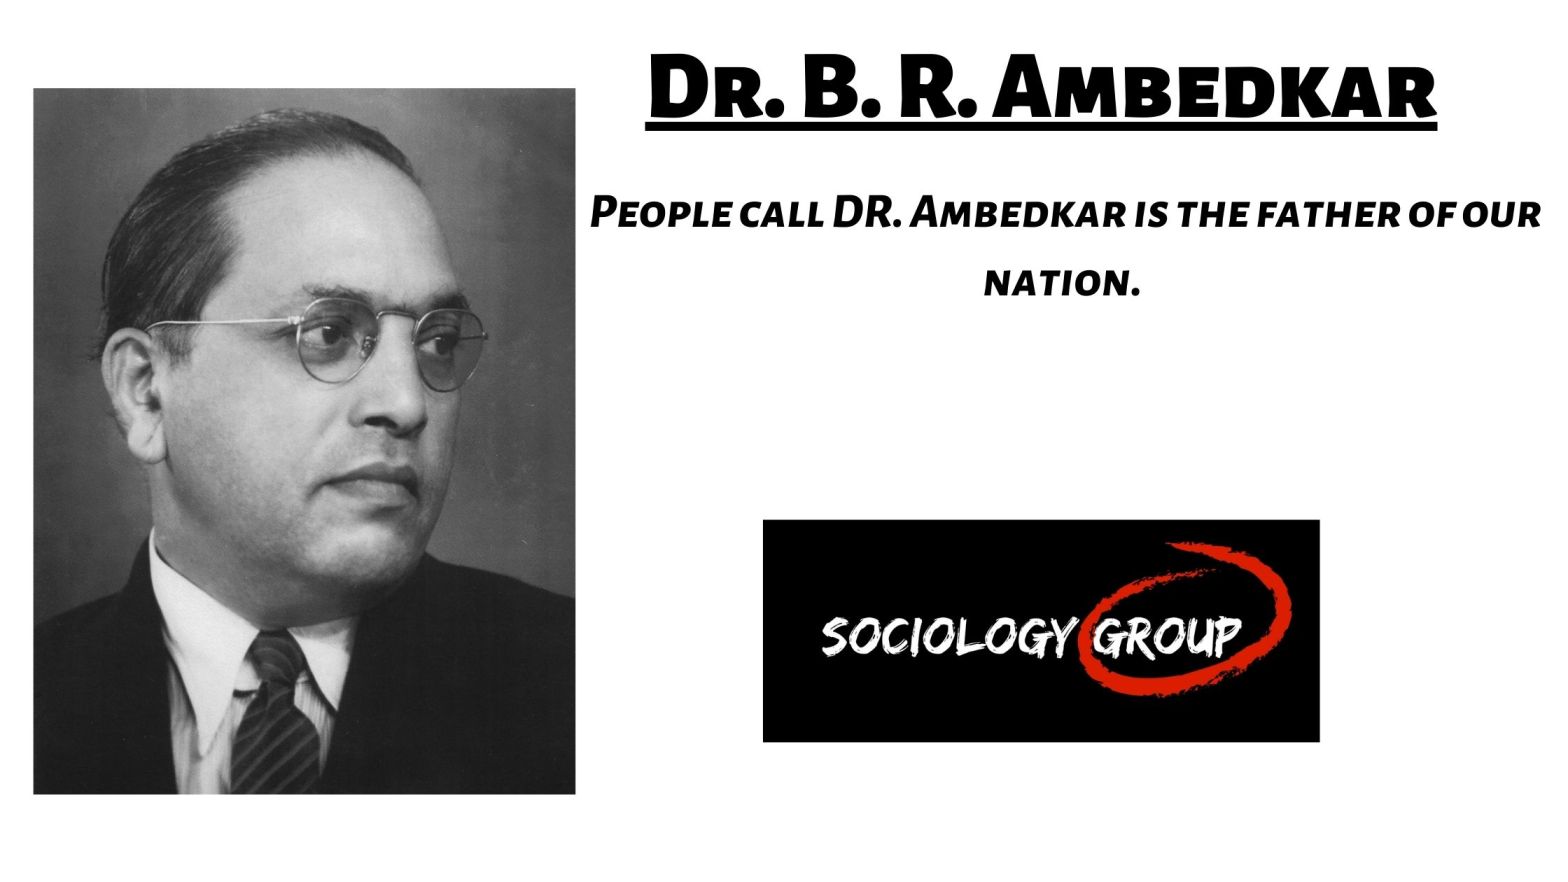 DR BR AMBEDKAR IS THE FATHER OF THE NATION, HE WAS AGAINST Caste discrimination